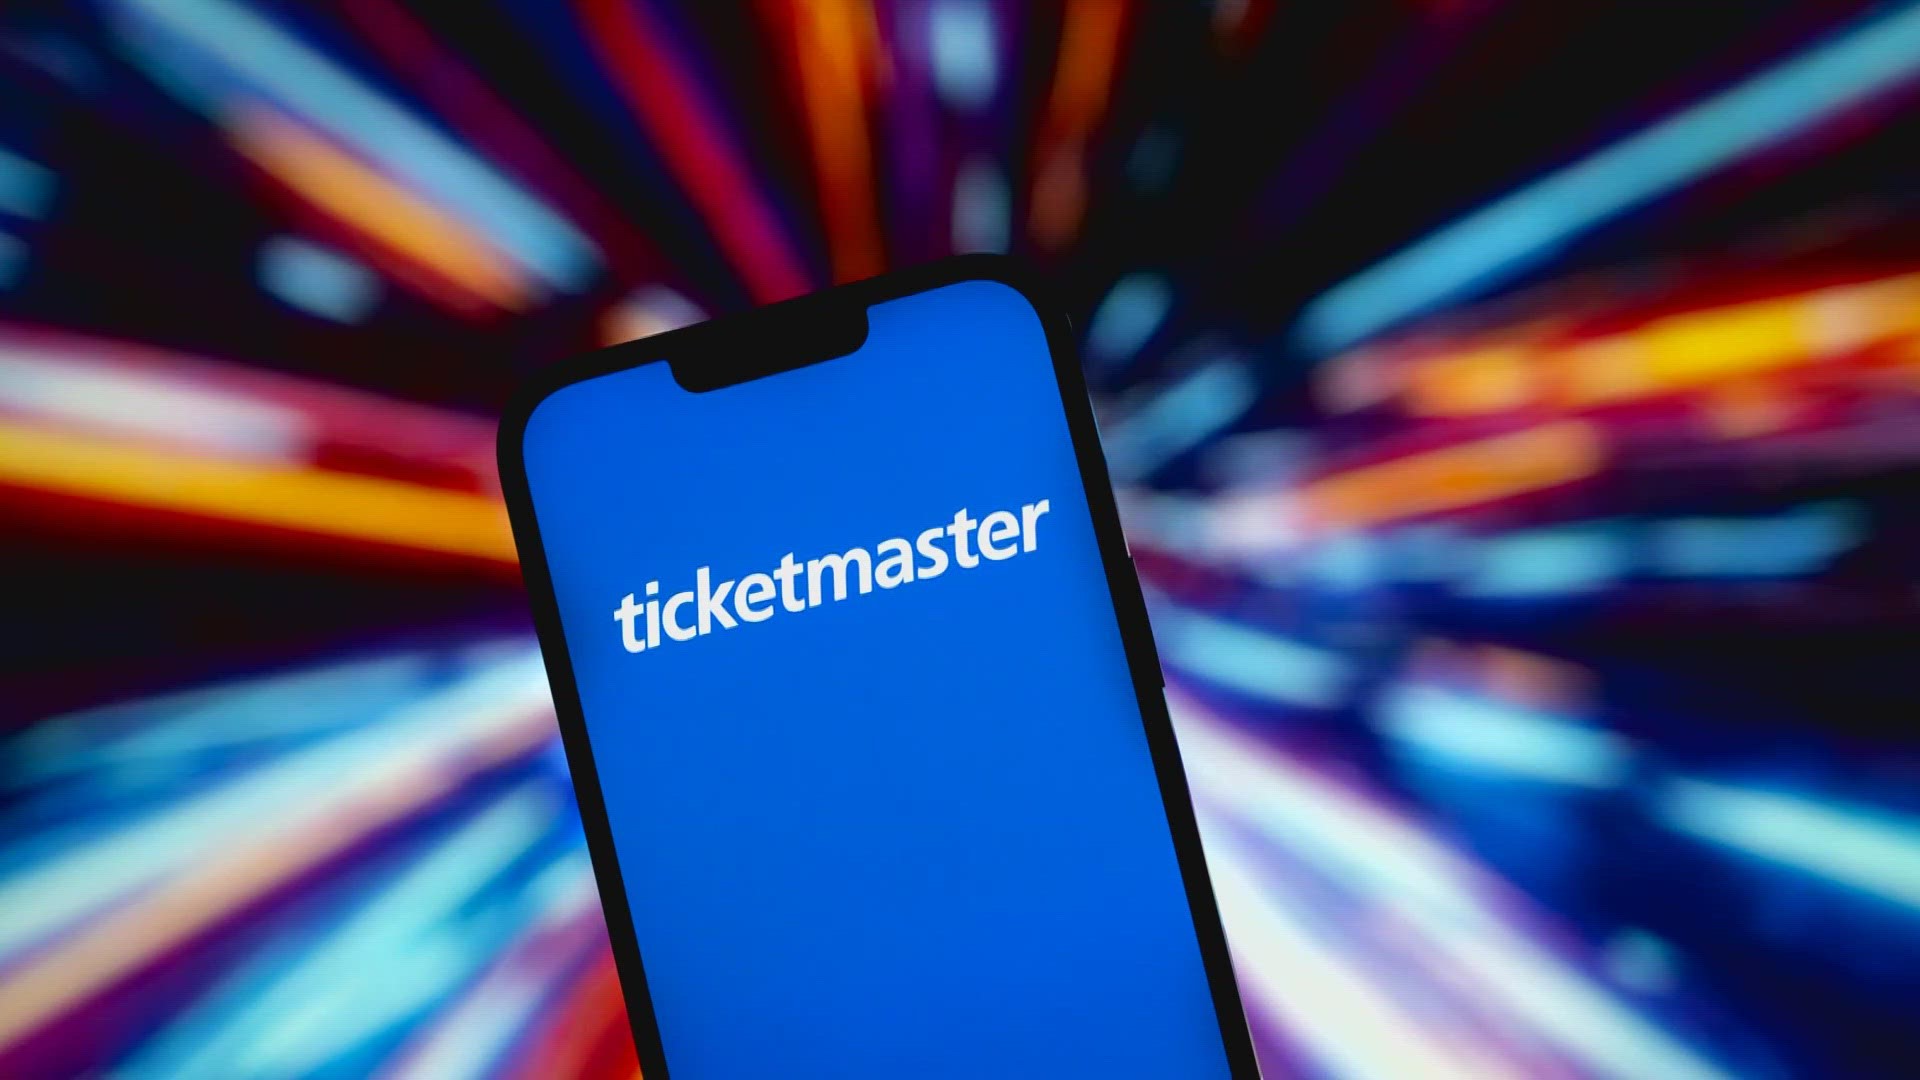 That's the parent company behind TicketMaster, which has come under scrutiny in recent years.